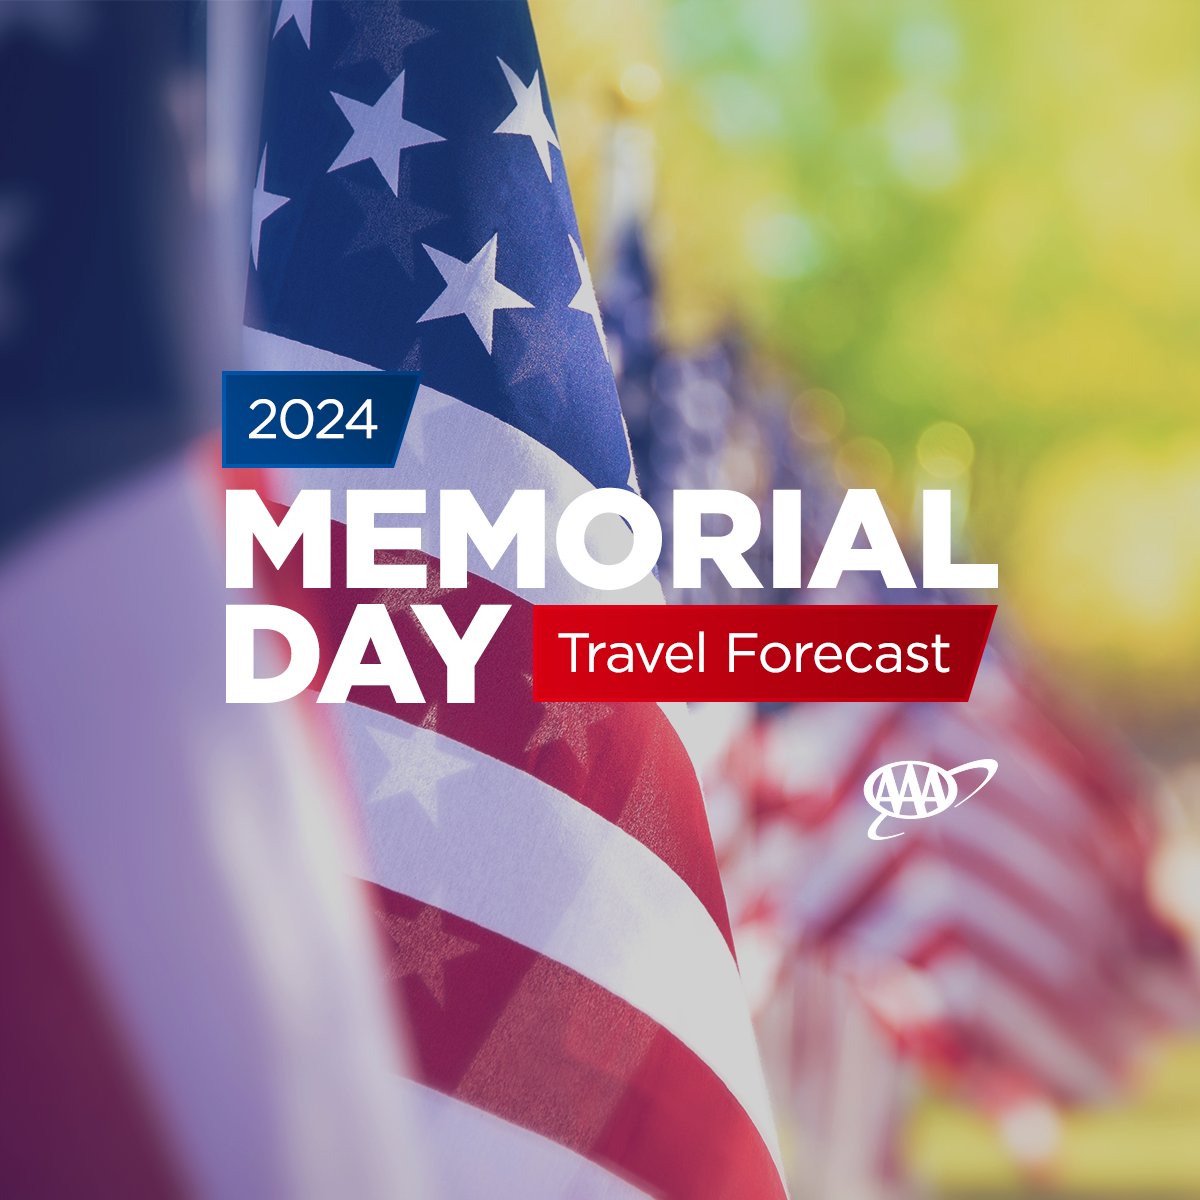 Will the number of #MemorialDay travelers break records this year? Find out on Monday, May 13 as #AAA releases its annual travel forecast for the kickoff weekend for summer travel. #SummerTravel #Roadtrip @southdakota @DakotaTourism @VisitRapidCity @MountRushmoreNM @BadlandsNPS